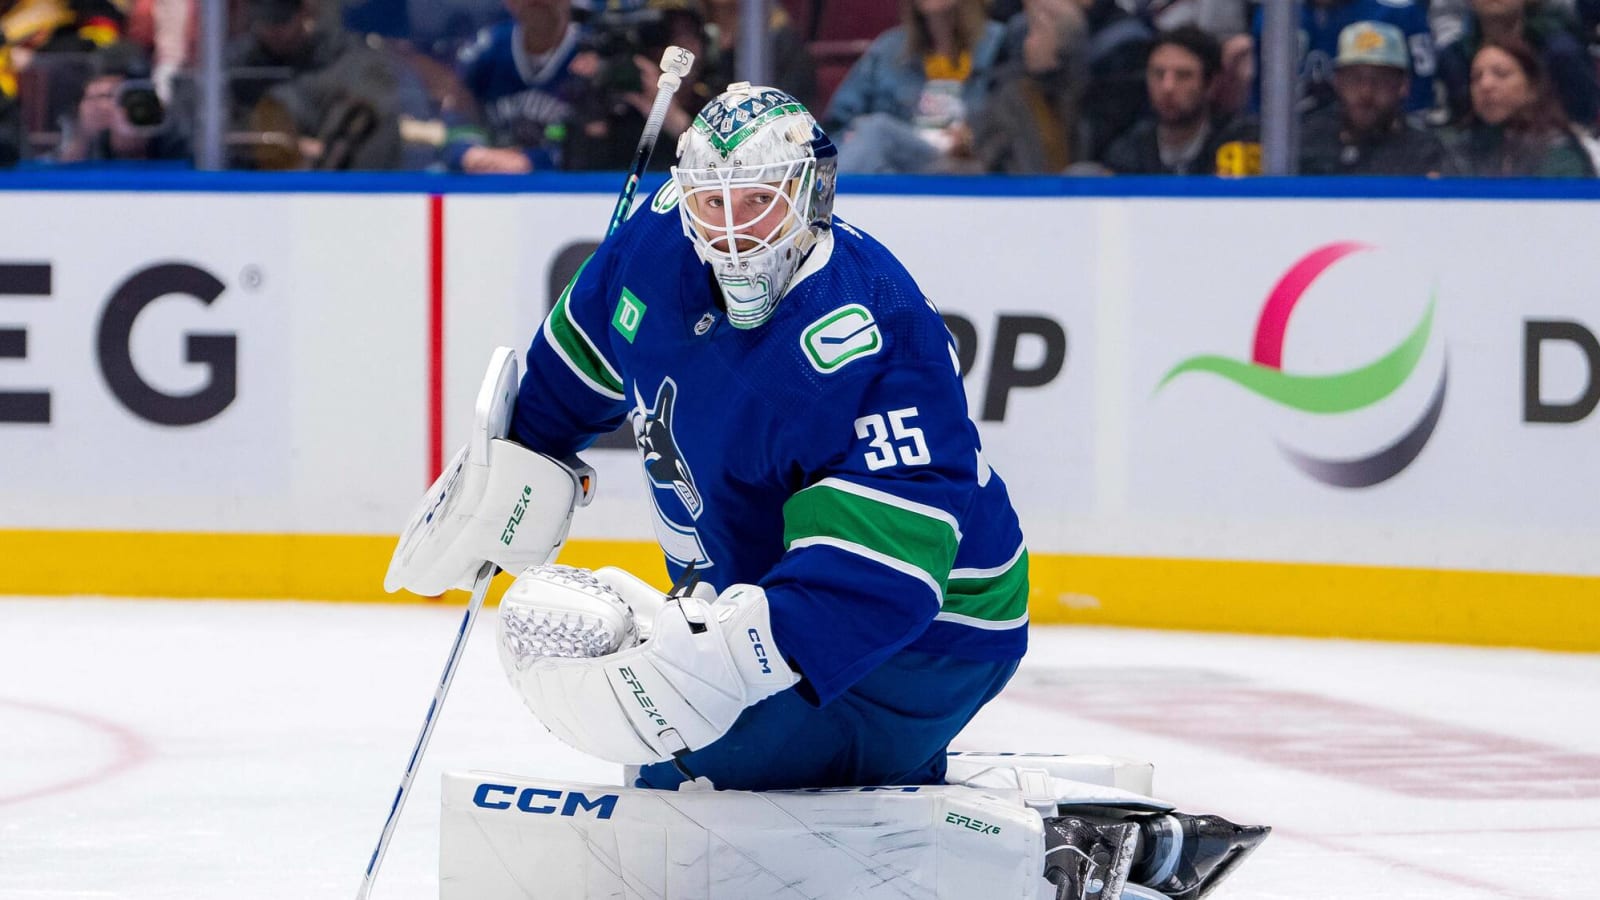 Canucks: Thatcher Demko will not play game #7